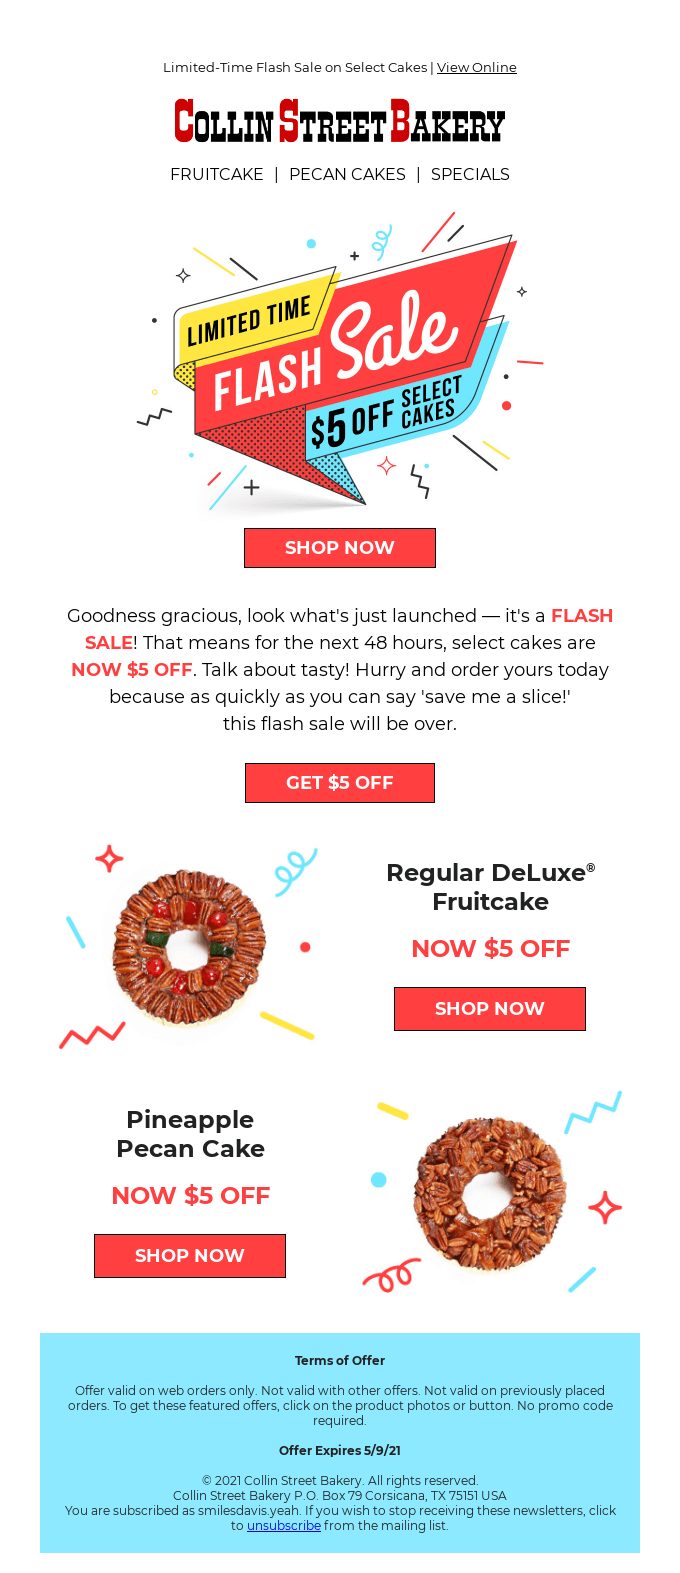 $5 OFF — $5 OFF — $5 OFF